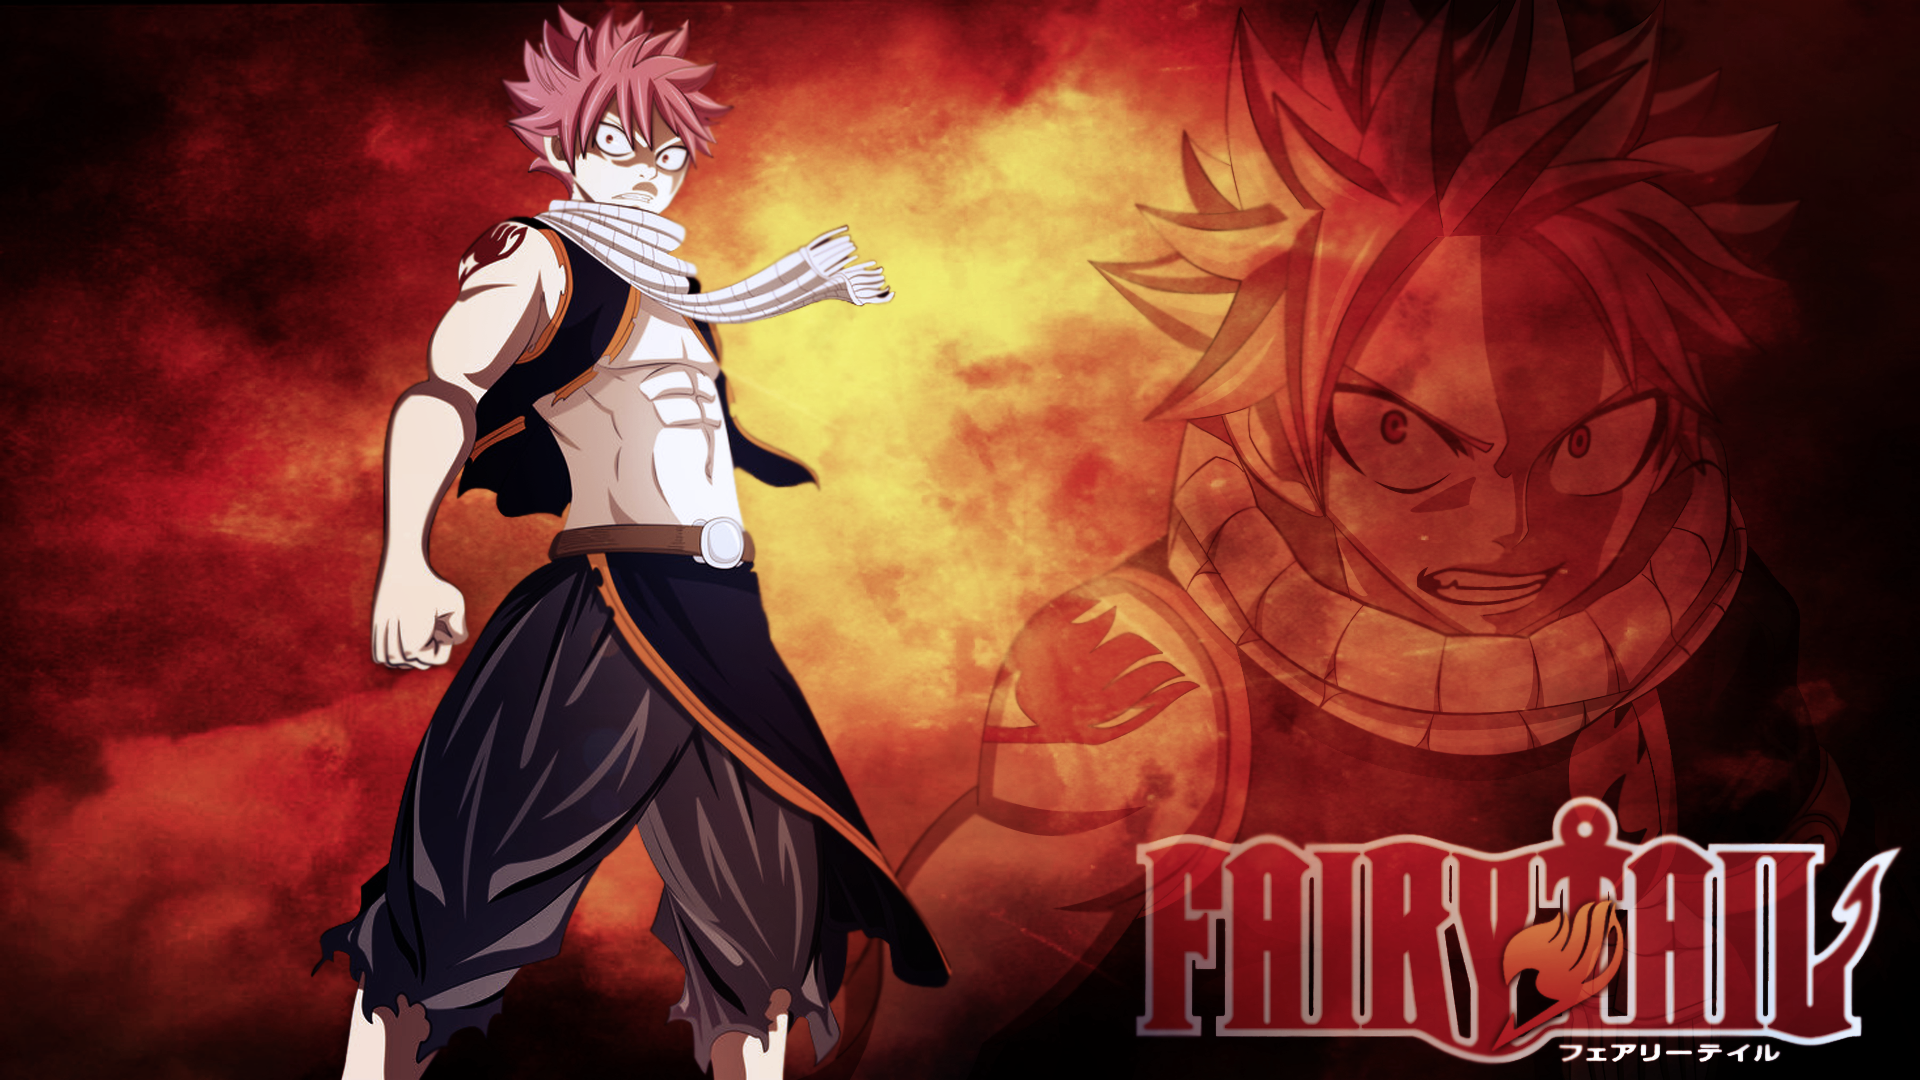 Fairy Tail Wallpaper Background HD 5910 Wallpaper Cool 1920x1080